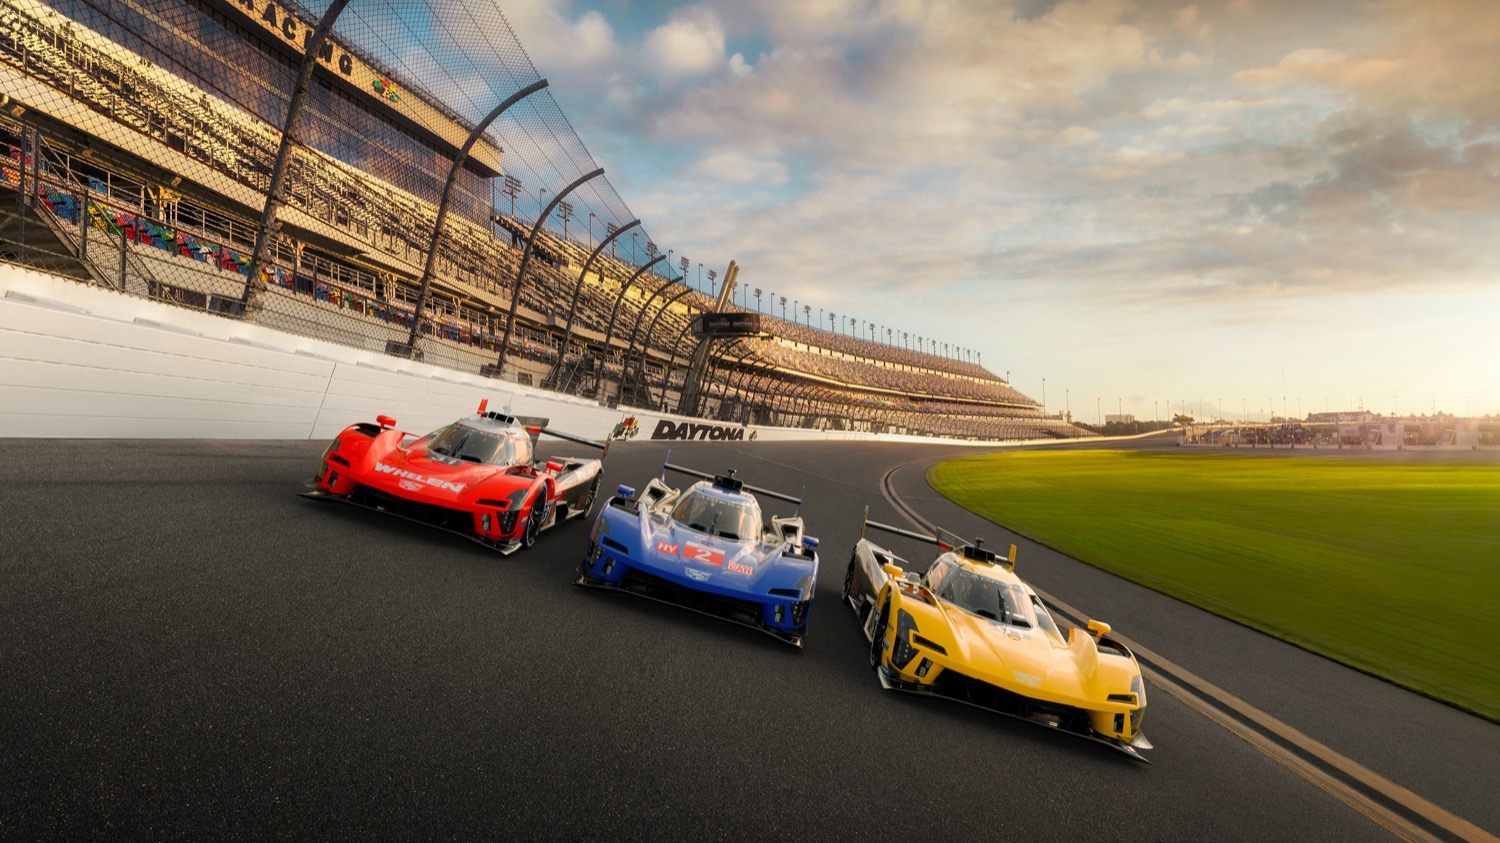 Cadillac To Field 3 V Series.R Race Cars At 24 Hours Of LM